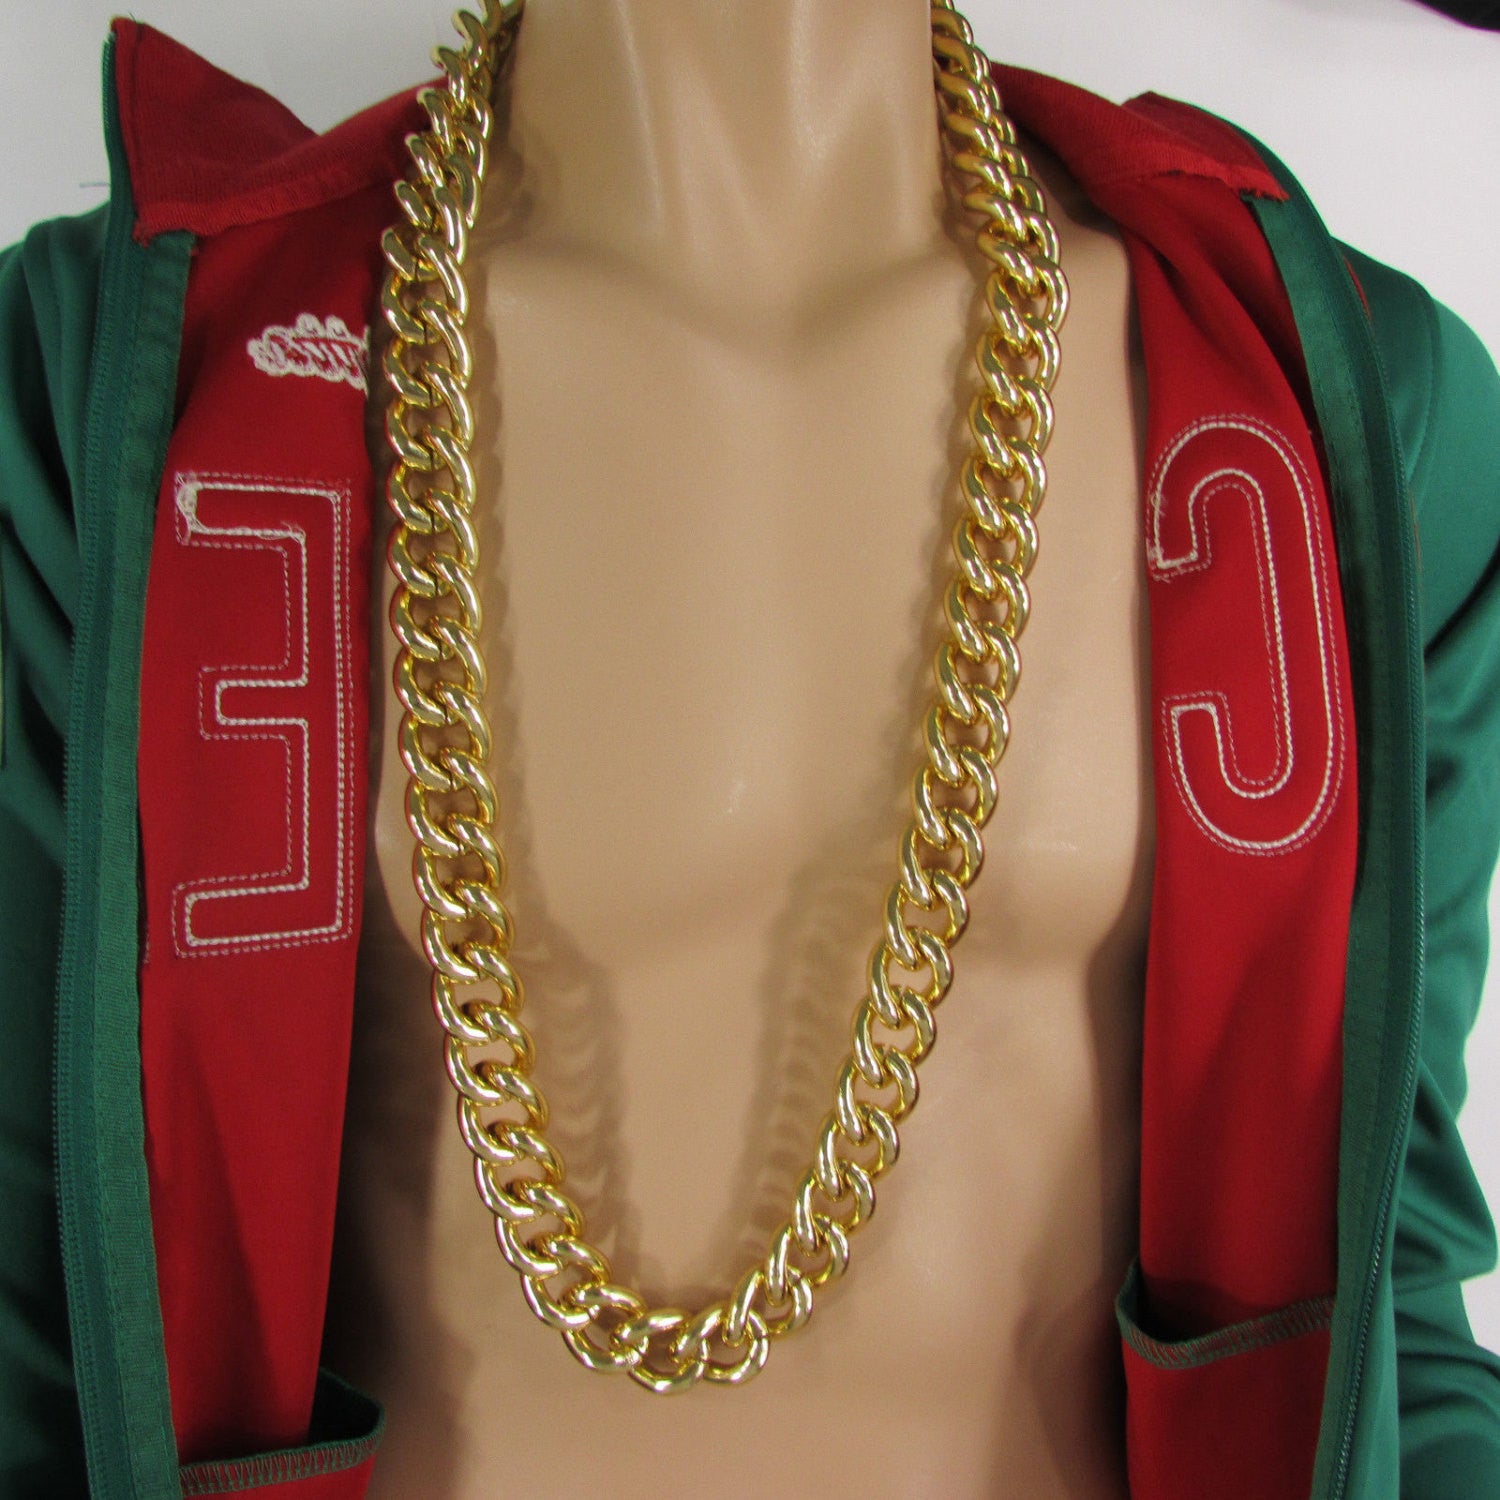 Gold Hip Hop Metal Thick Chains Extra Long Necklace Men Women Chunky Gangster Fashion - alwaystyle4you - 1